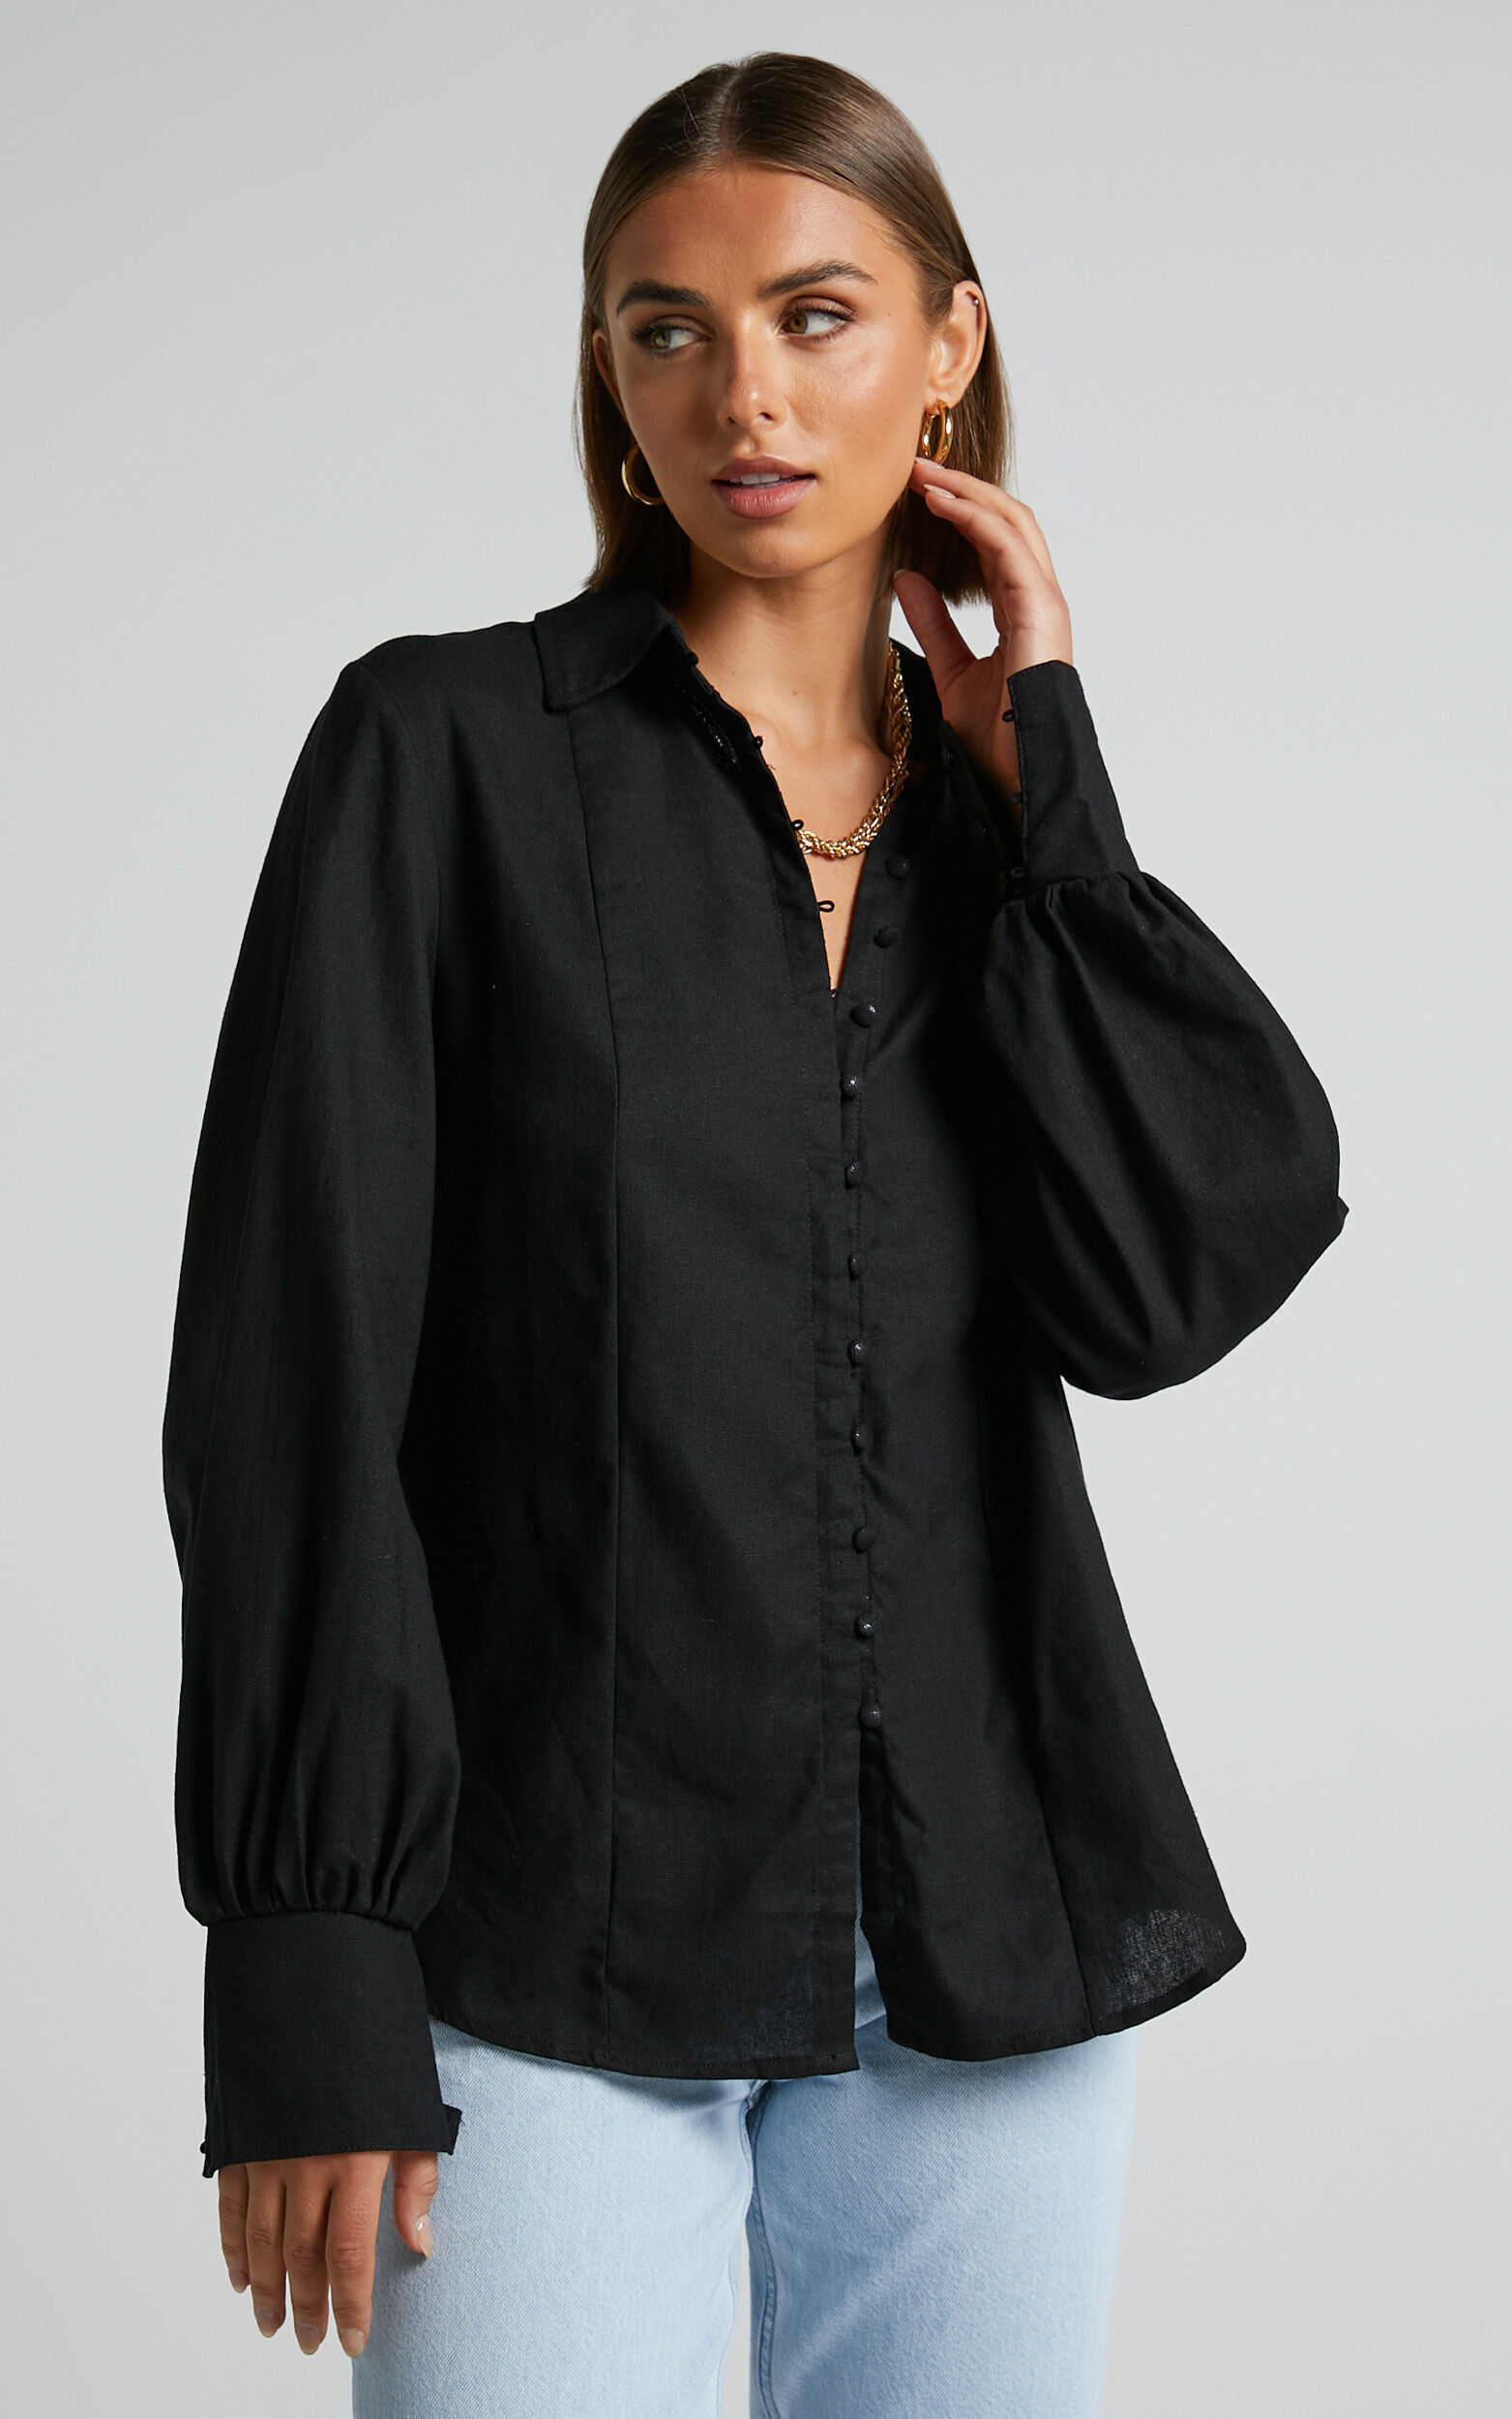 Kiva Blouse - Linen Look Long Sleeve Button Up Blouse in Black - 06, BLK1